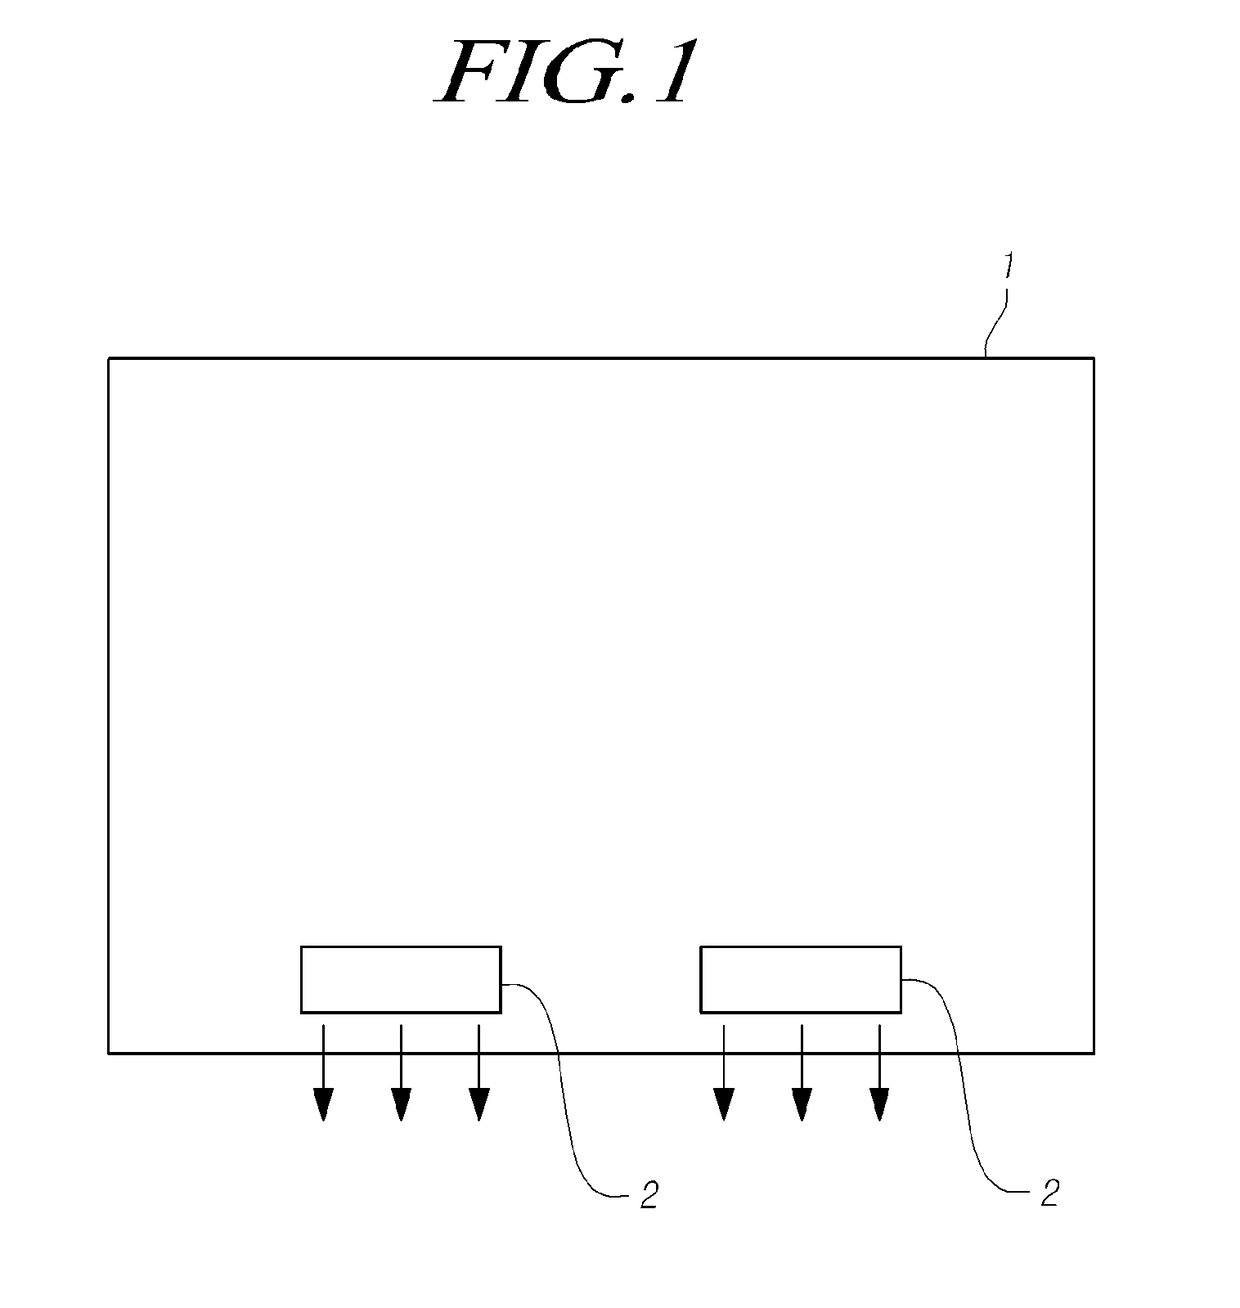 Panel vibration type display device for generating sound